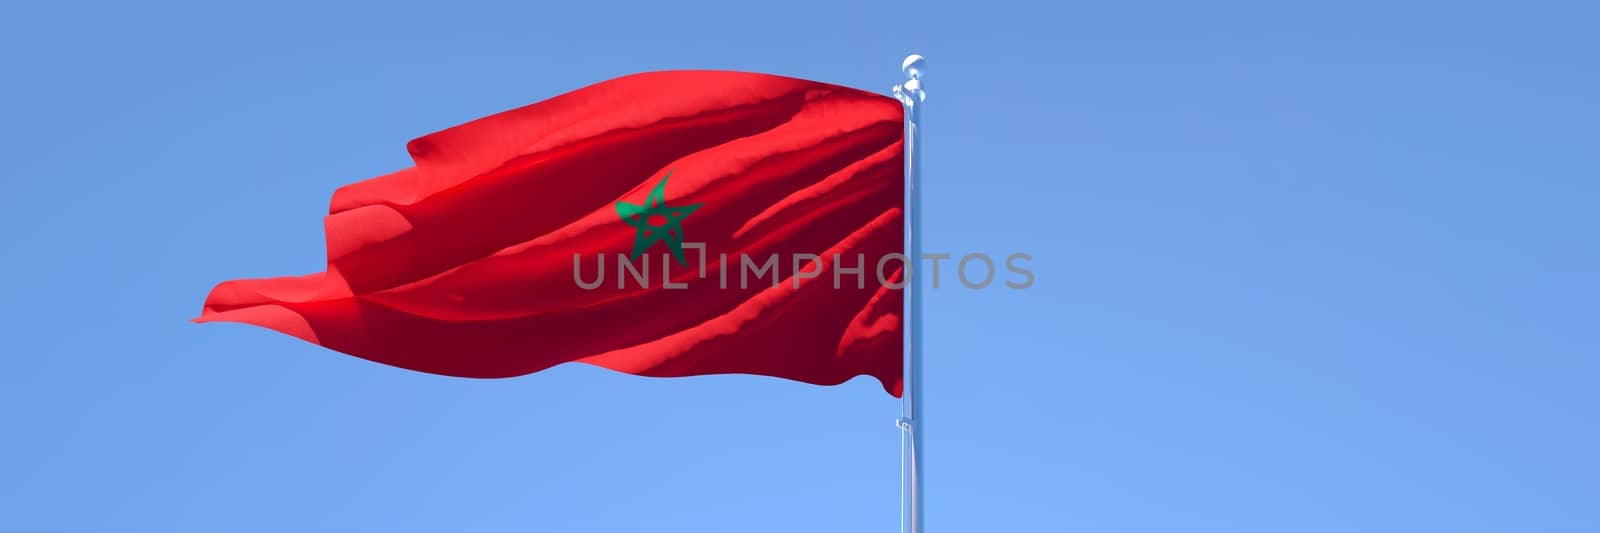 3D rendering of the national flag of Morocco waving in the wind against a blue sky